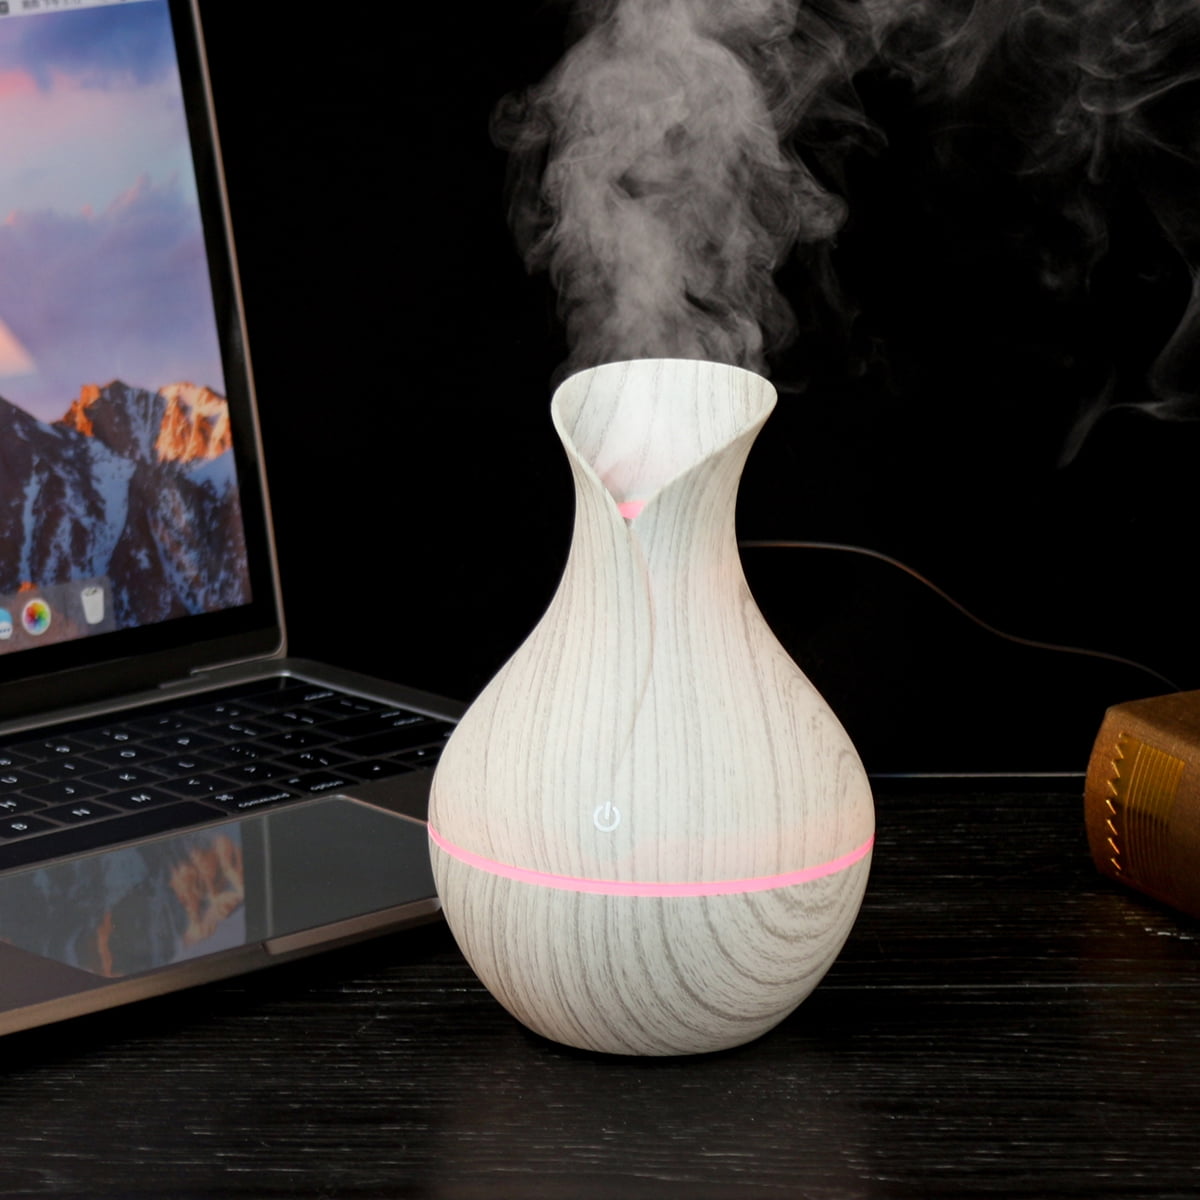 Details about   Essential Oil Diffuser home Humidifier Air Aromatherapy Ultrasonic Aroma IN 